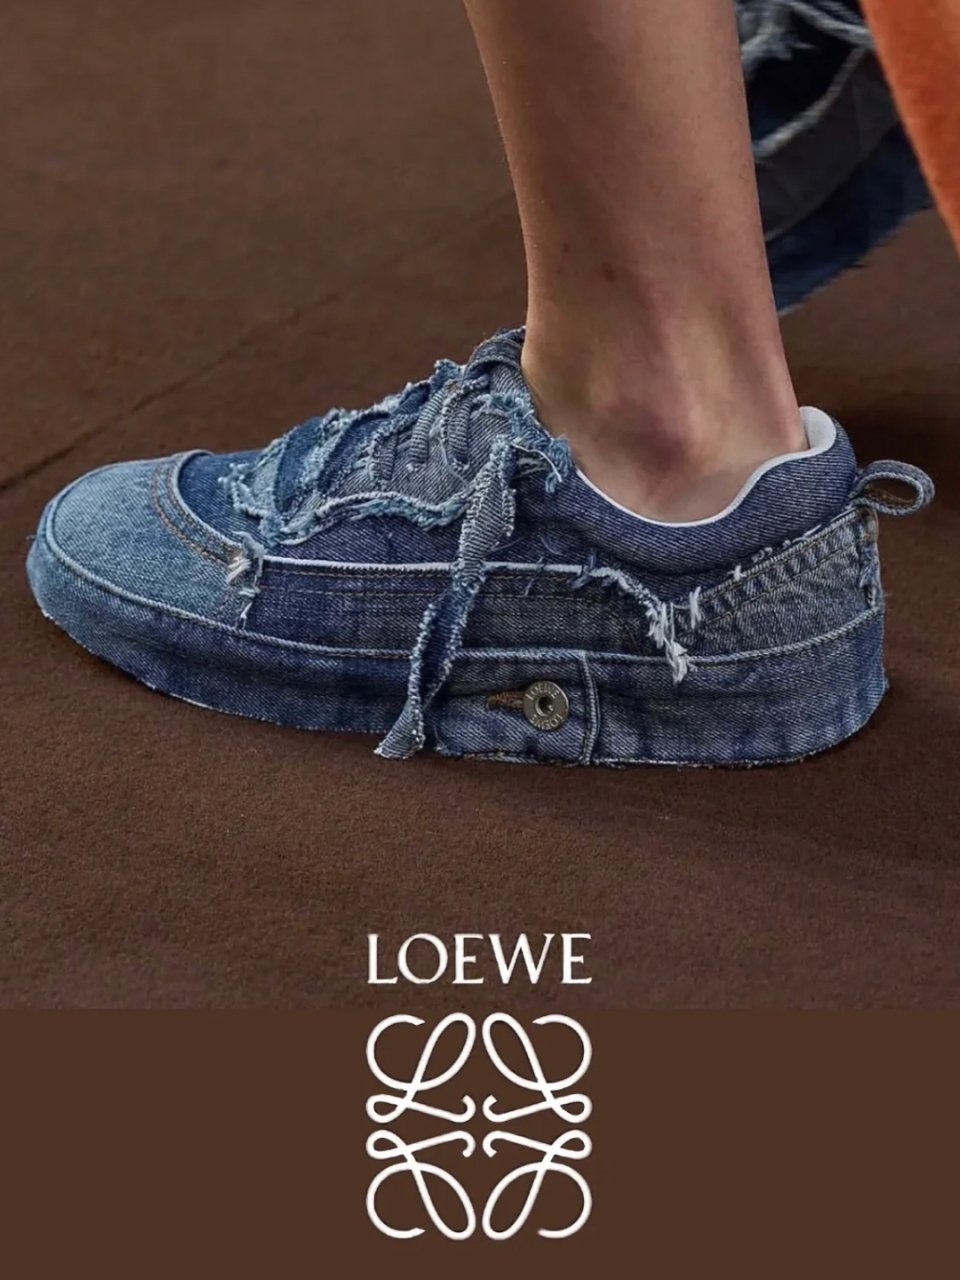 LOEWE | reinventing craft and leather.